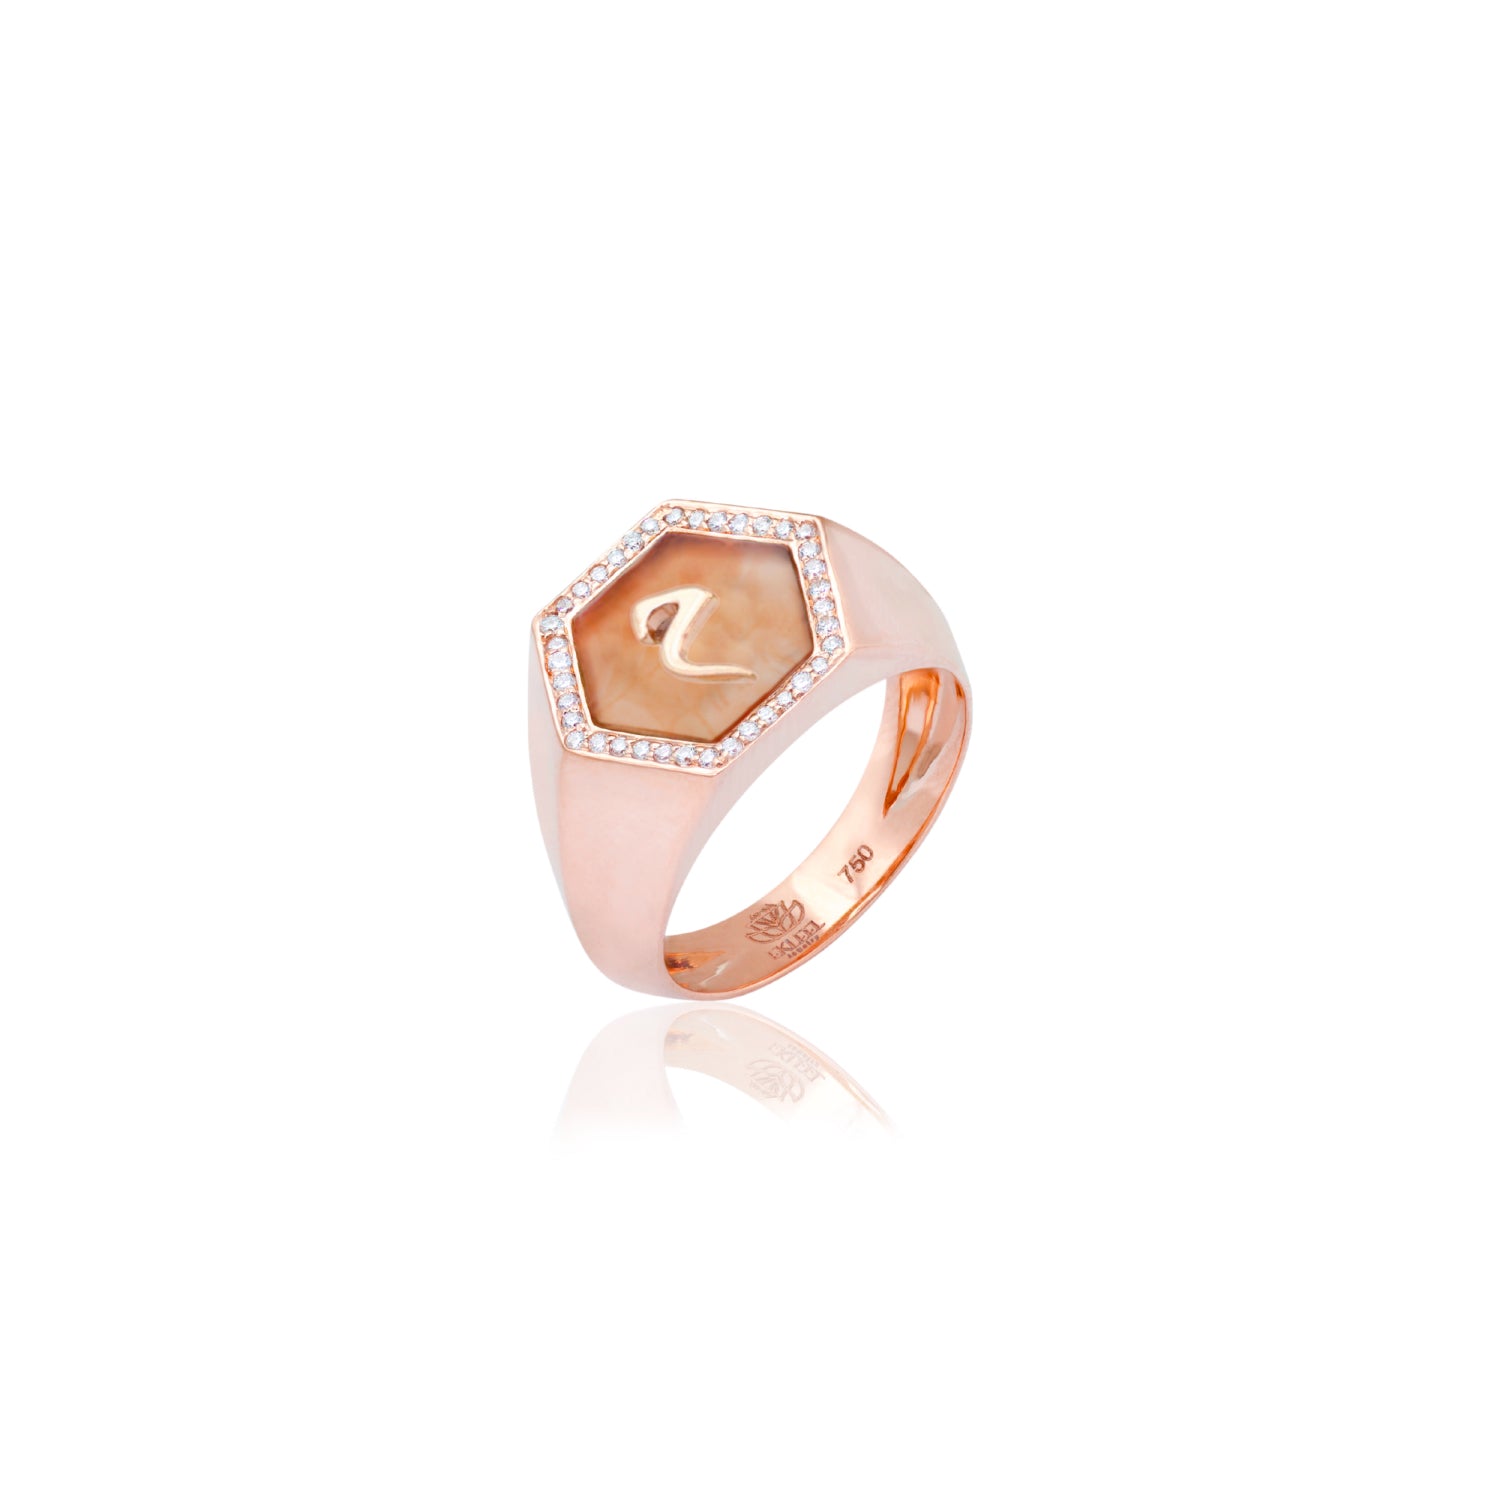 Qamoos 2.0 Letter م Carnelian and Diamond Signet Ring in Rose Gold